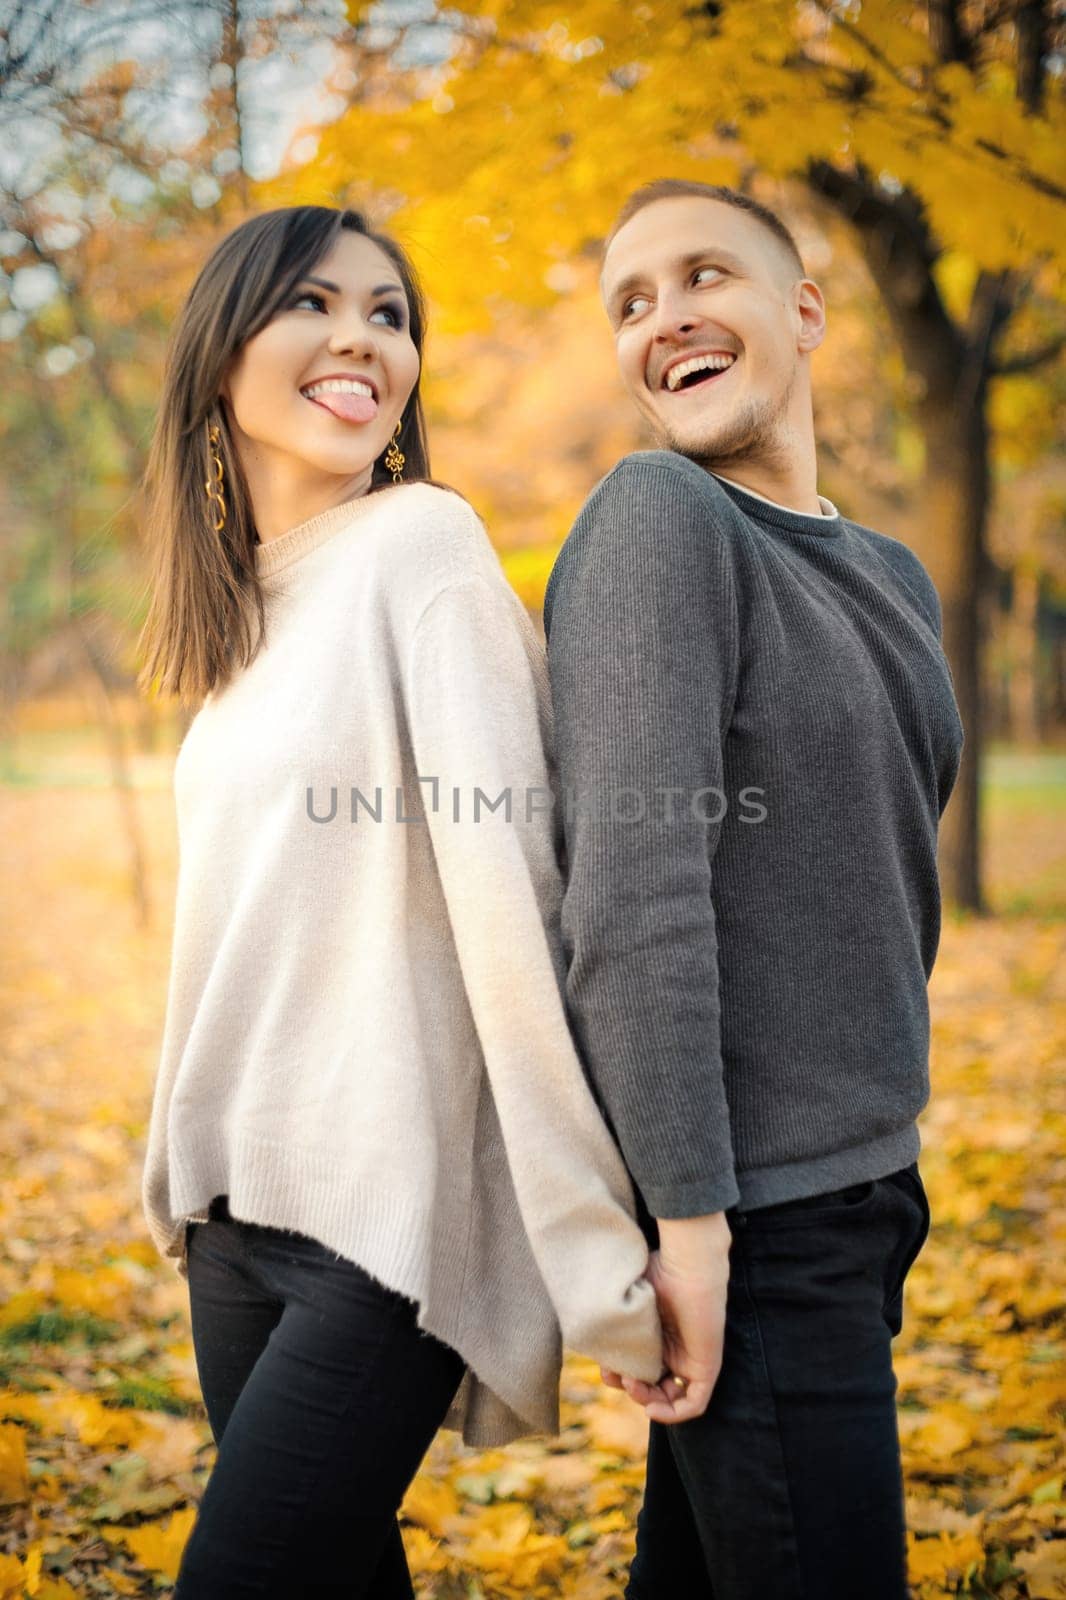 Young smiling couple looking at each other spending time together on weekends in autumn park.